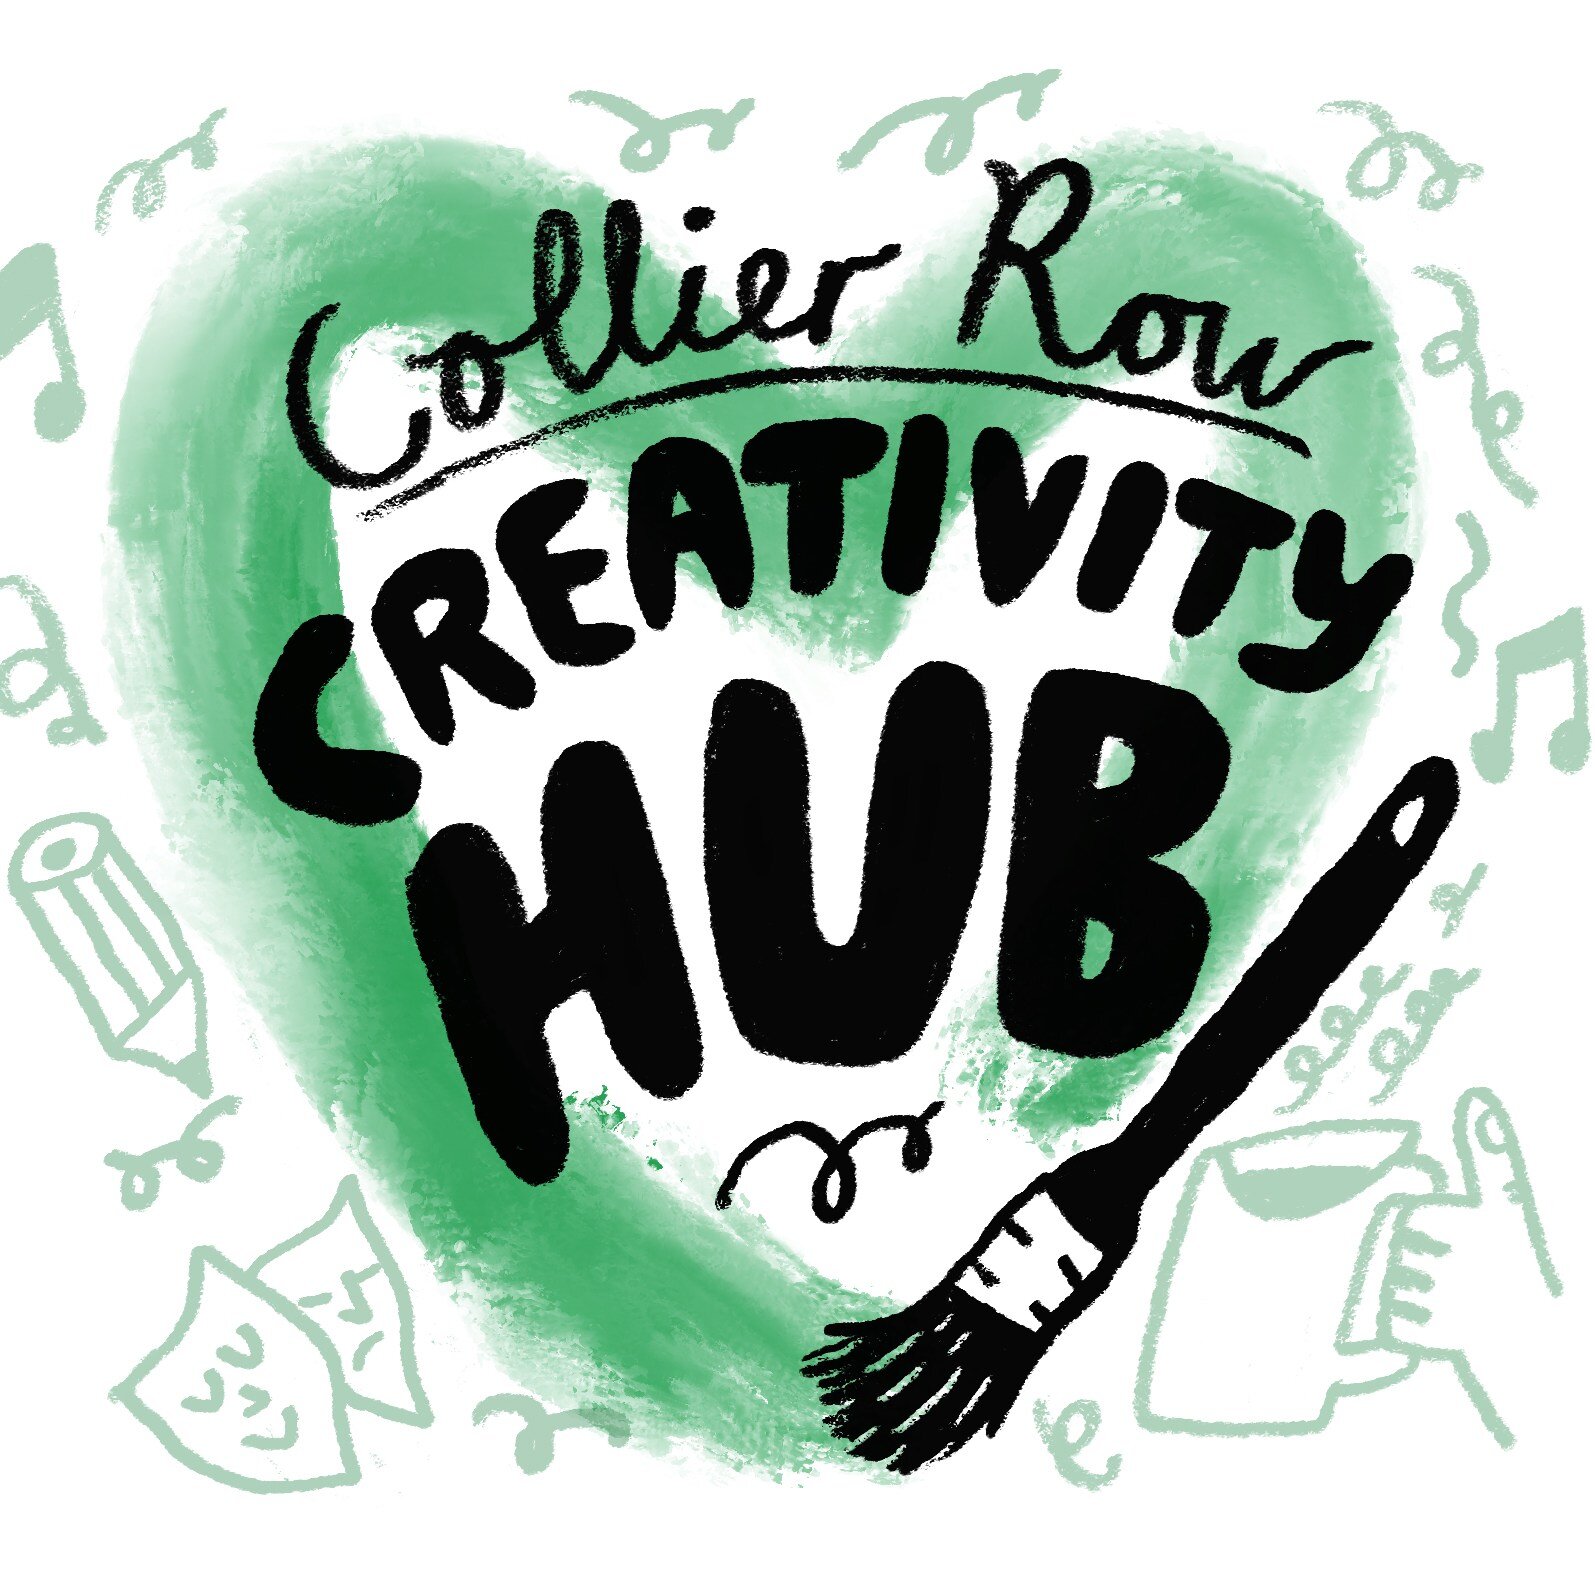 What's Next at our Collier Row Creative Hub?

Following on from the success of our Wednesday Workshops and Skill Share Socials, we are now in the planning stage for a Spring and Summer full of creative activities! We invite you to an activity we are 